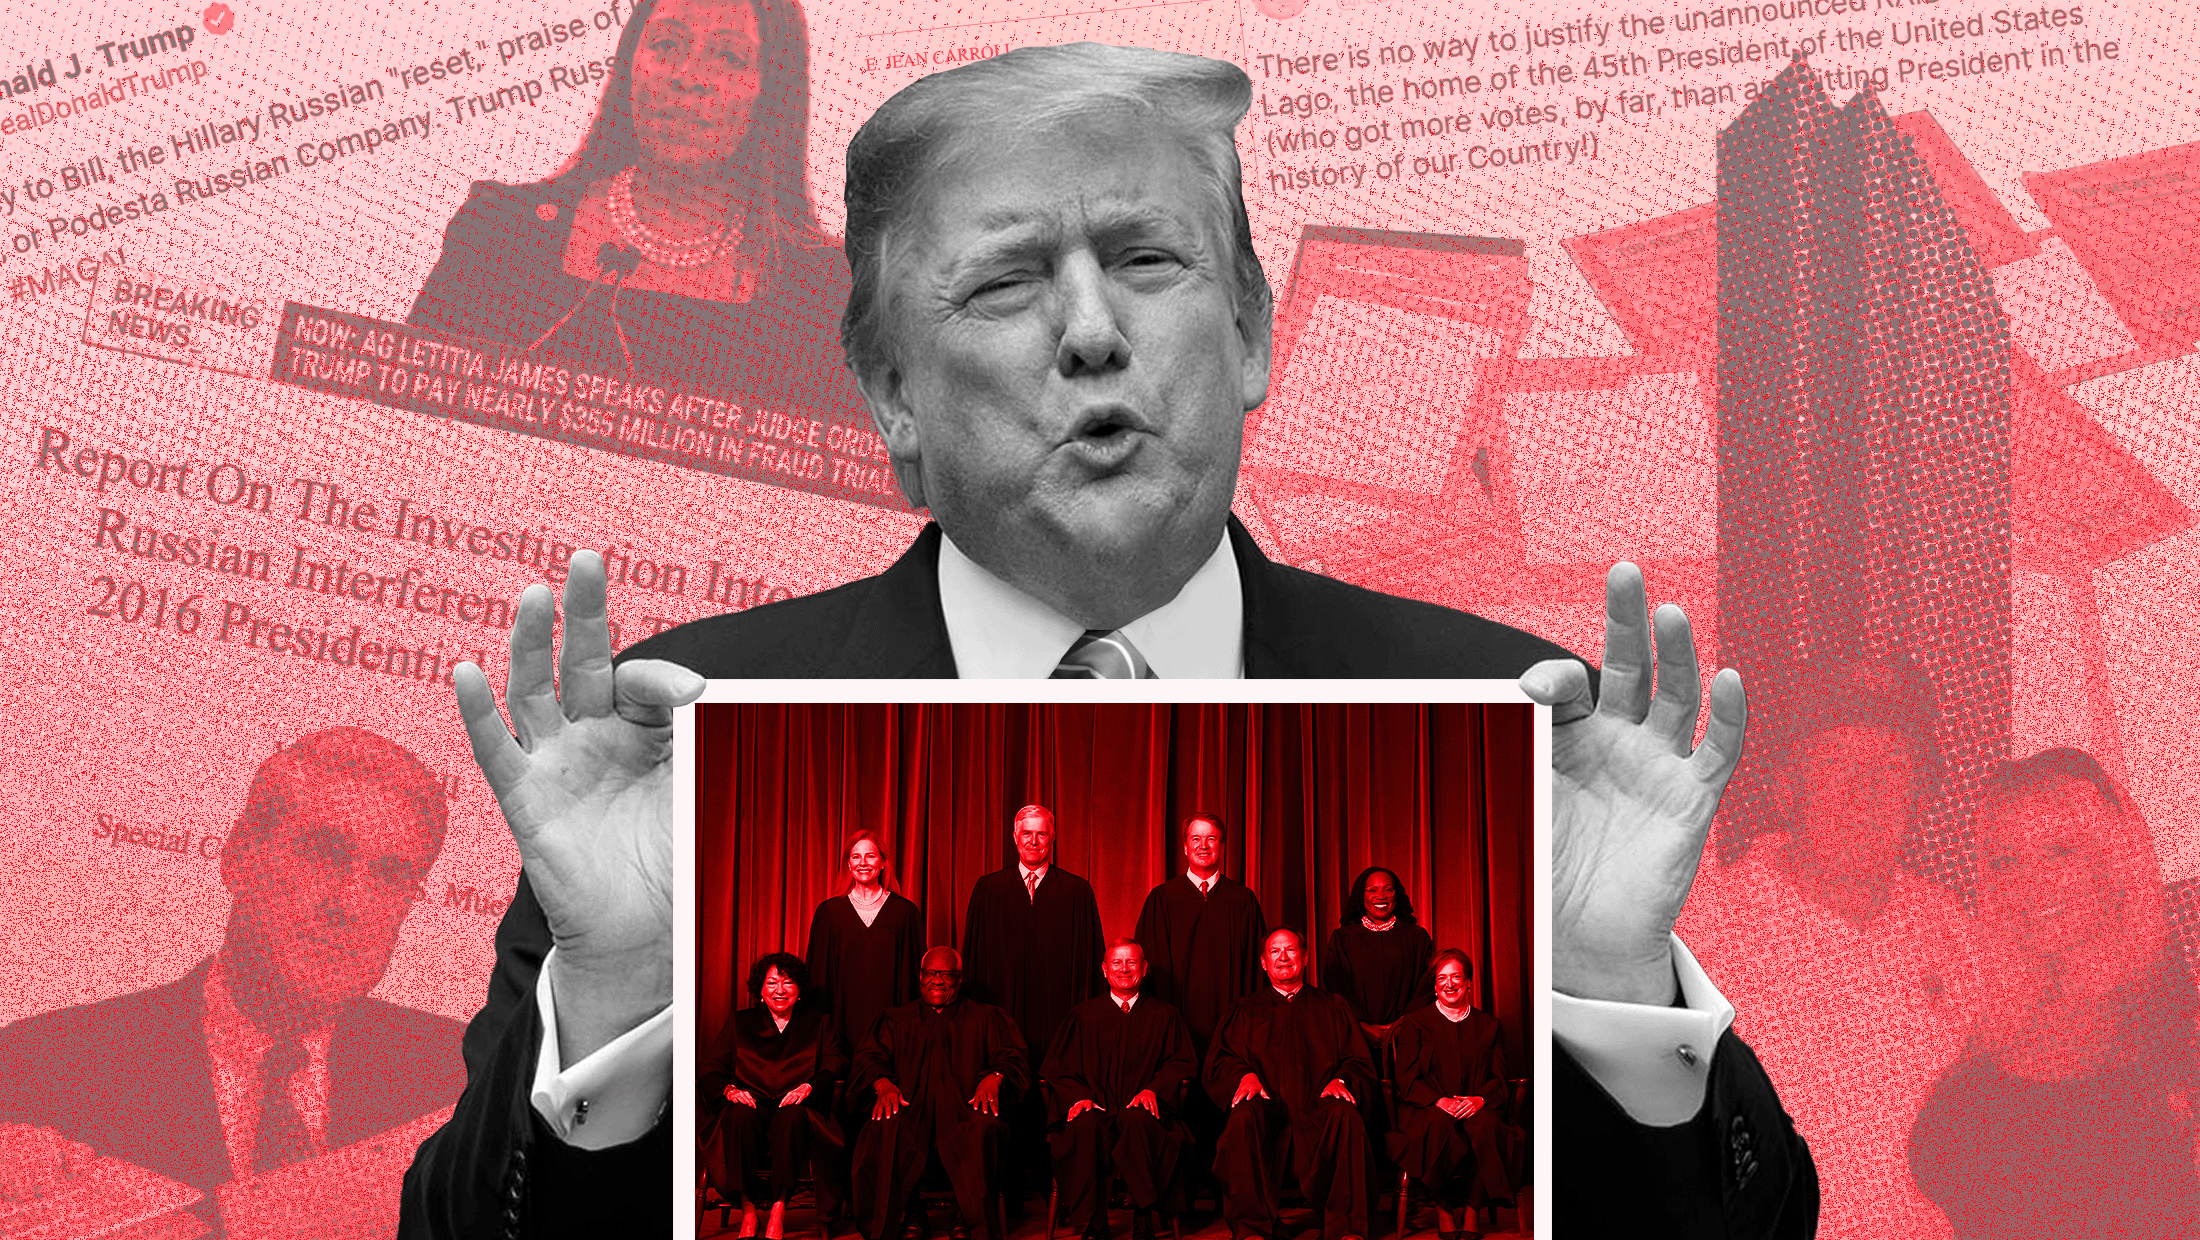 Red-toned image with headlines and tweets relating to Donald Trump's legal cases against him and then a large image of Donald Trump holding a red-toned image of the nine justices on the U.S. Supreme Court.